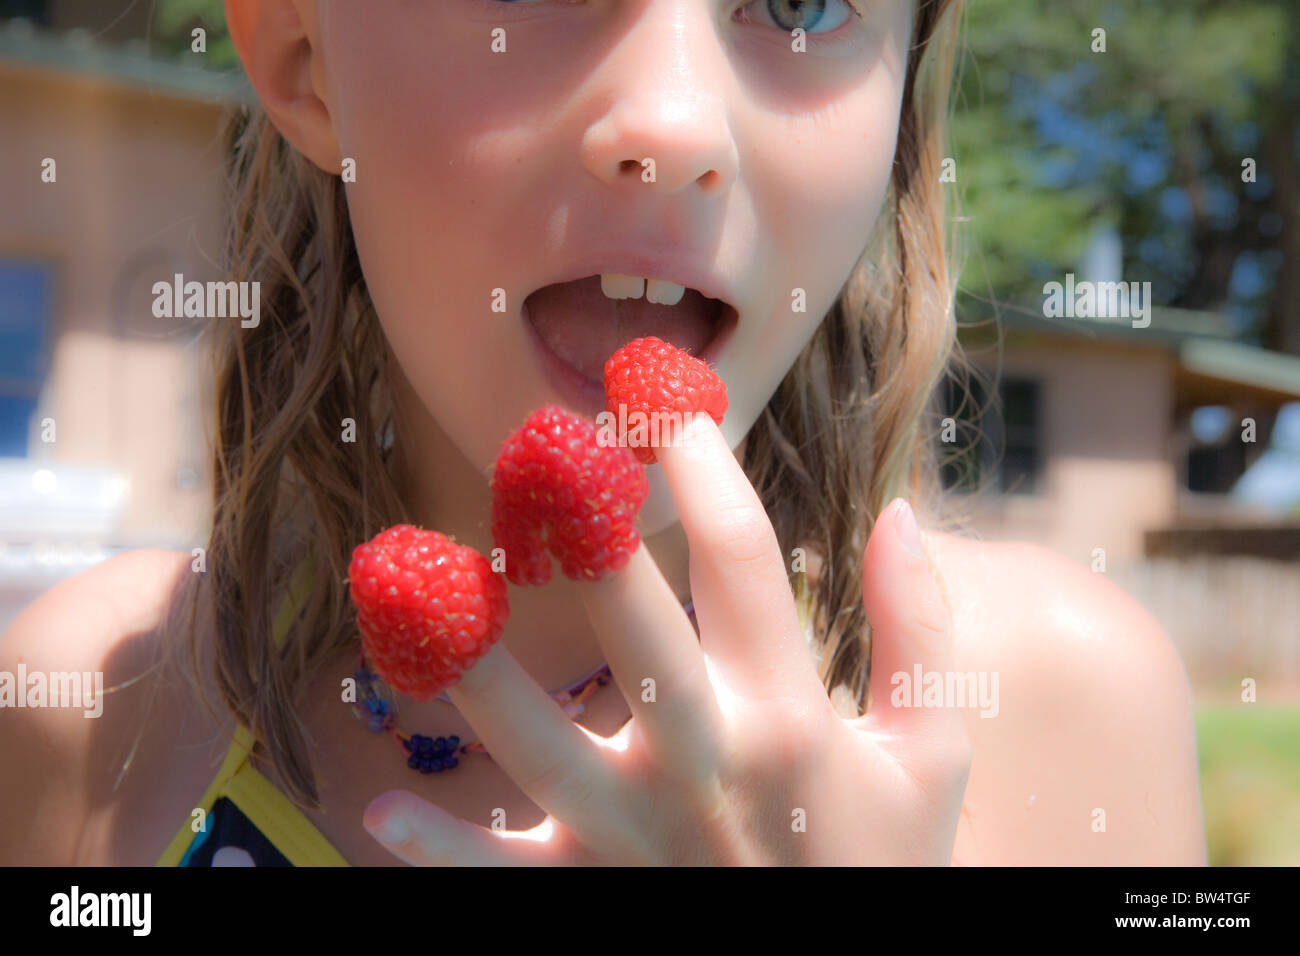 girl with raspberries on her fingertips, mouth open Stock Photo